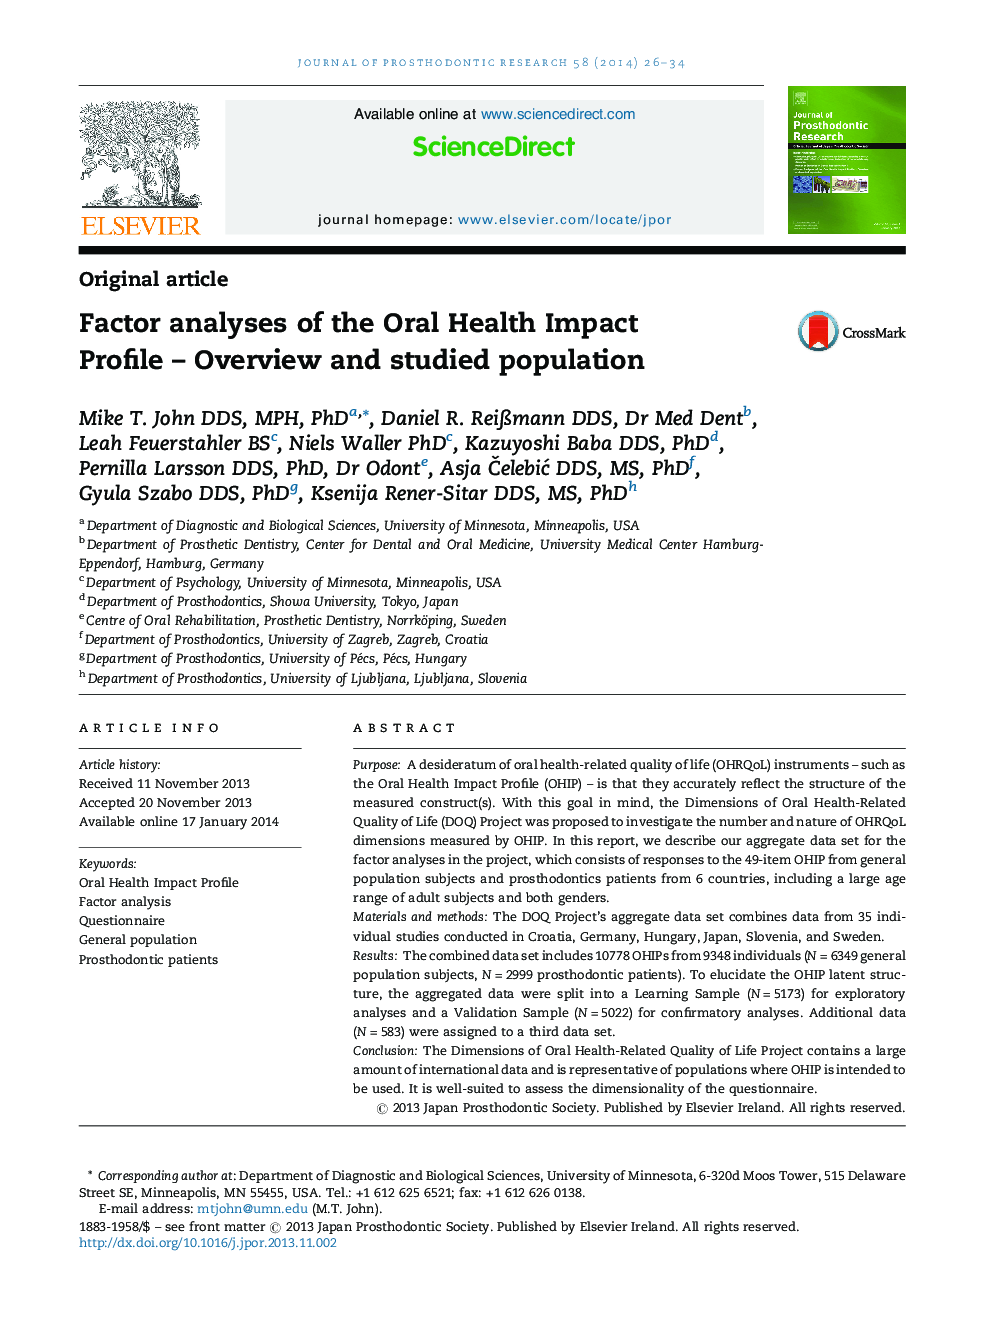 Factor analyses of the Oral Health Impact Profile - Overview and studied population